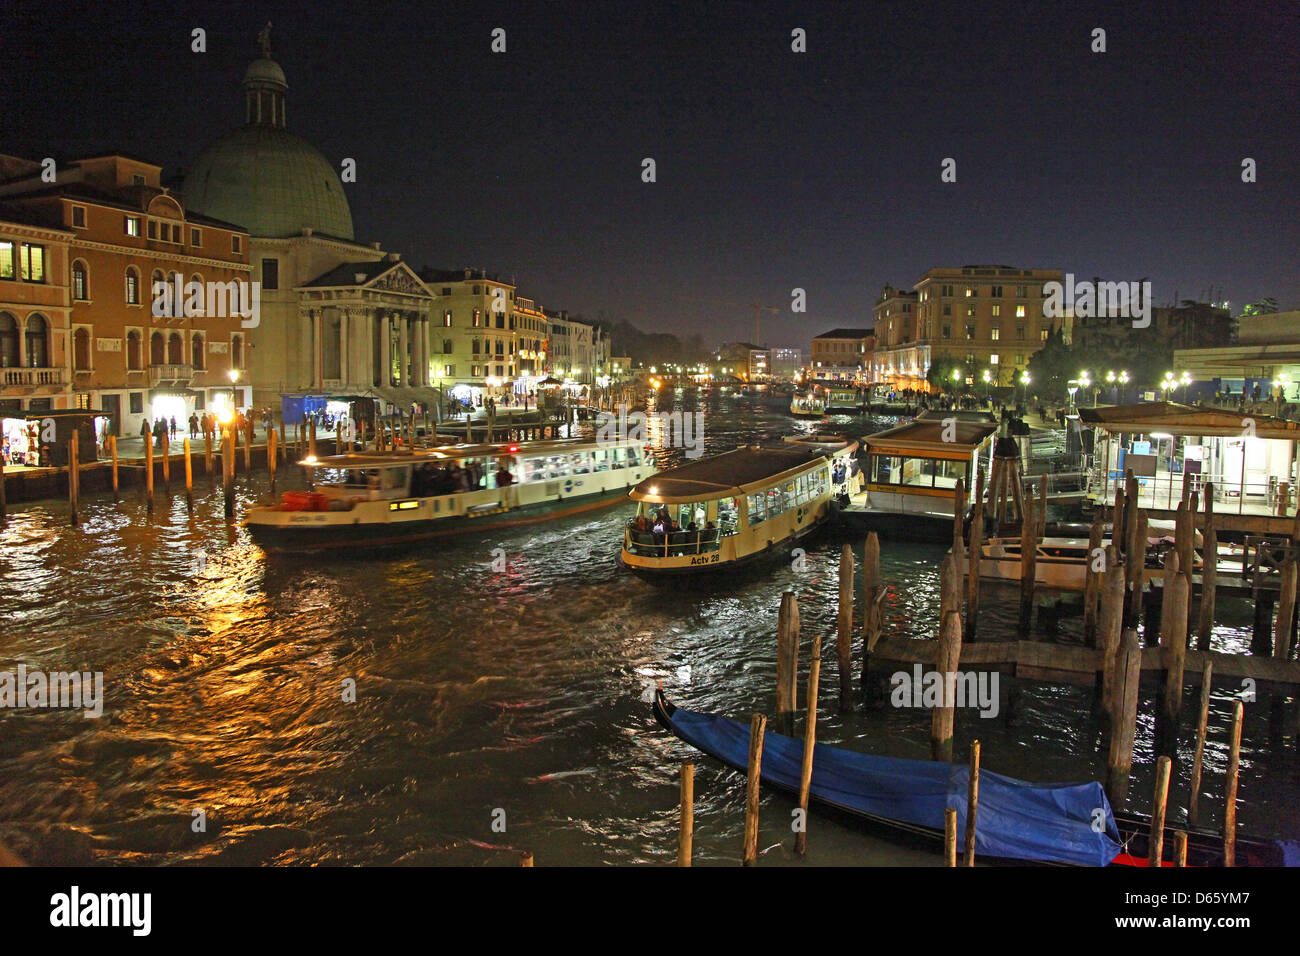 Vaporetti or water buses next to the pontoon or stop at Ferrovia station on the Grand Canal at night Venice Italy Stock Photo